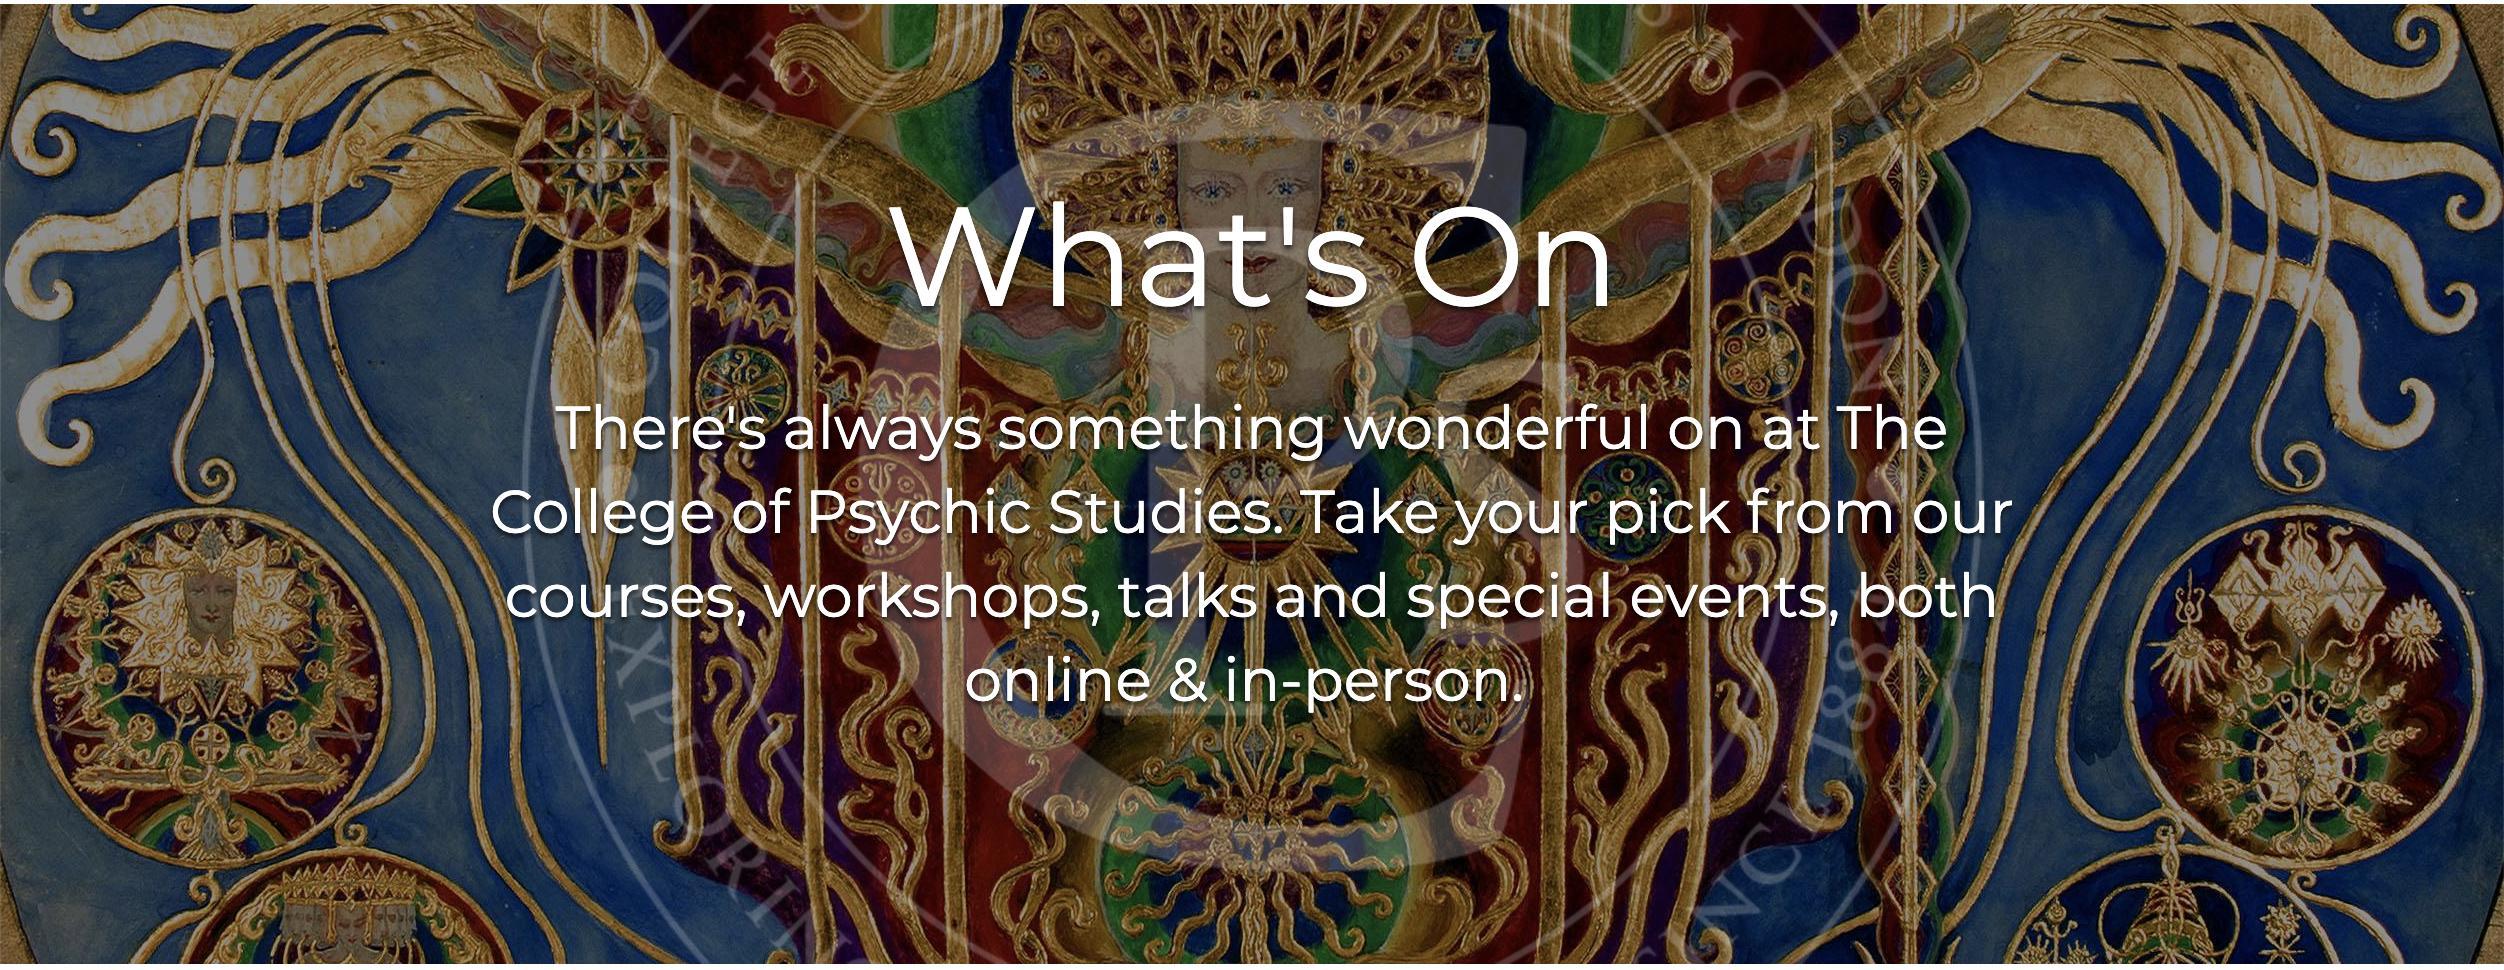 See What's On at The College of Psychic Studies